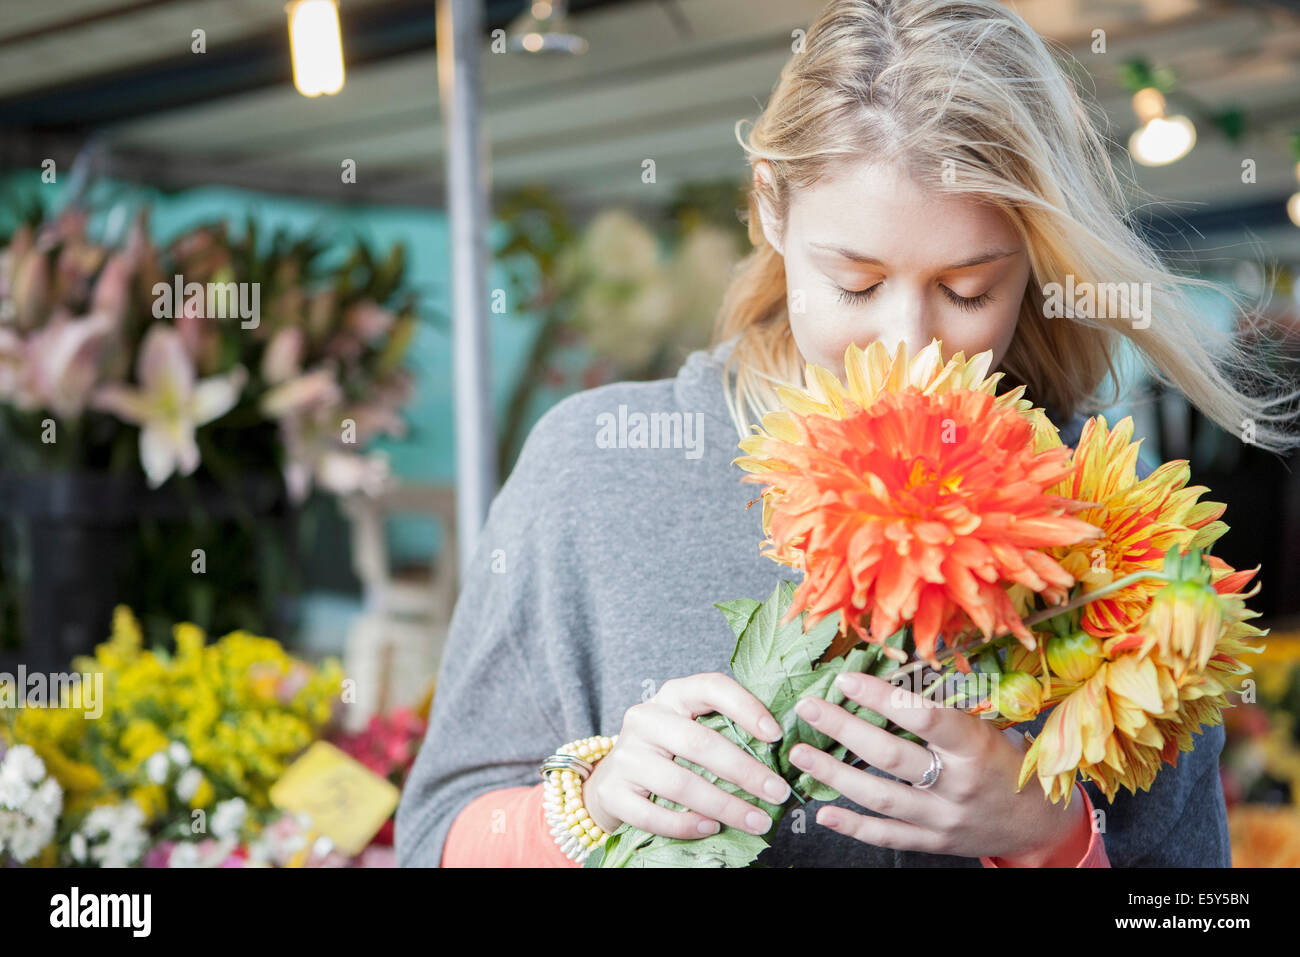 Young woman appreciating flower bouquet fragrance Stock Photo